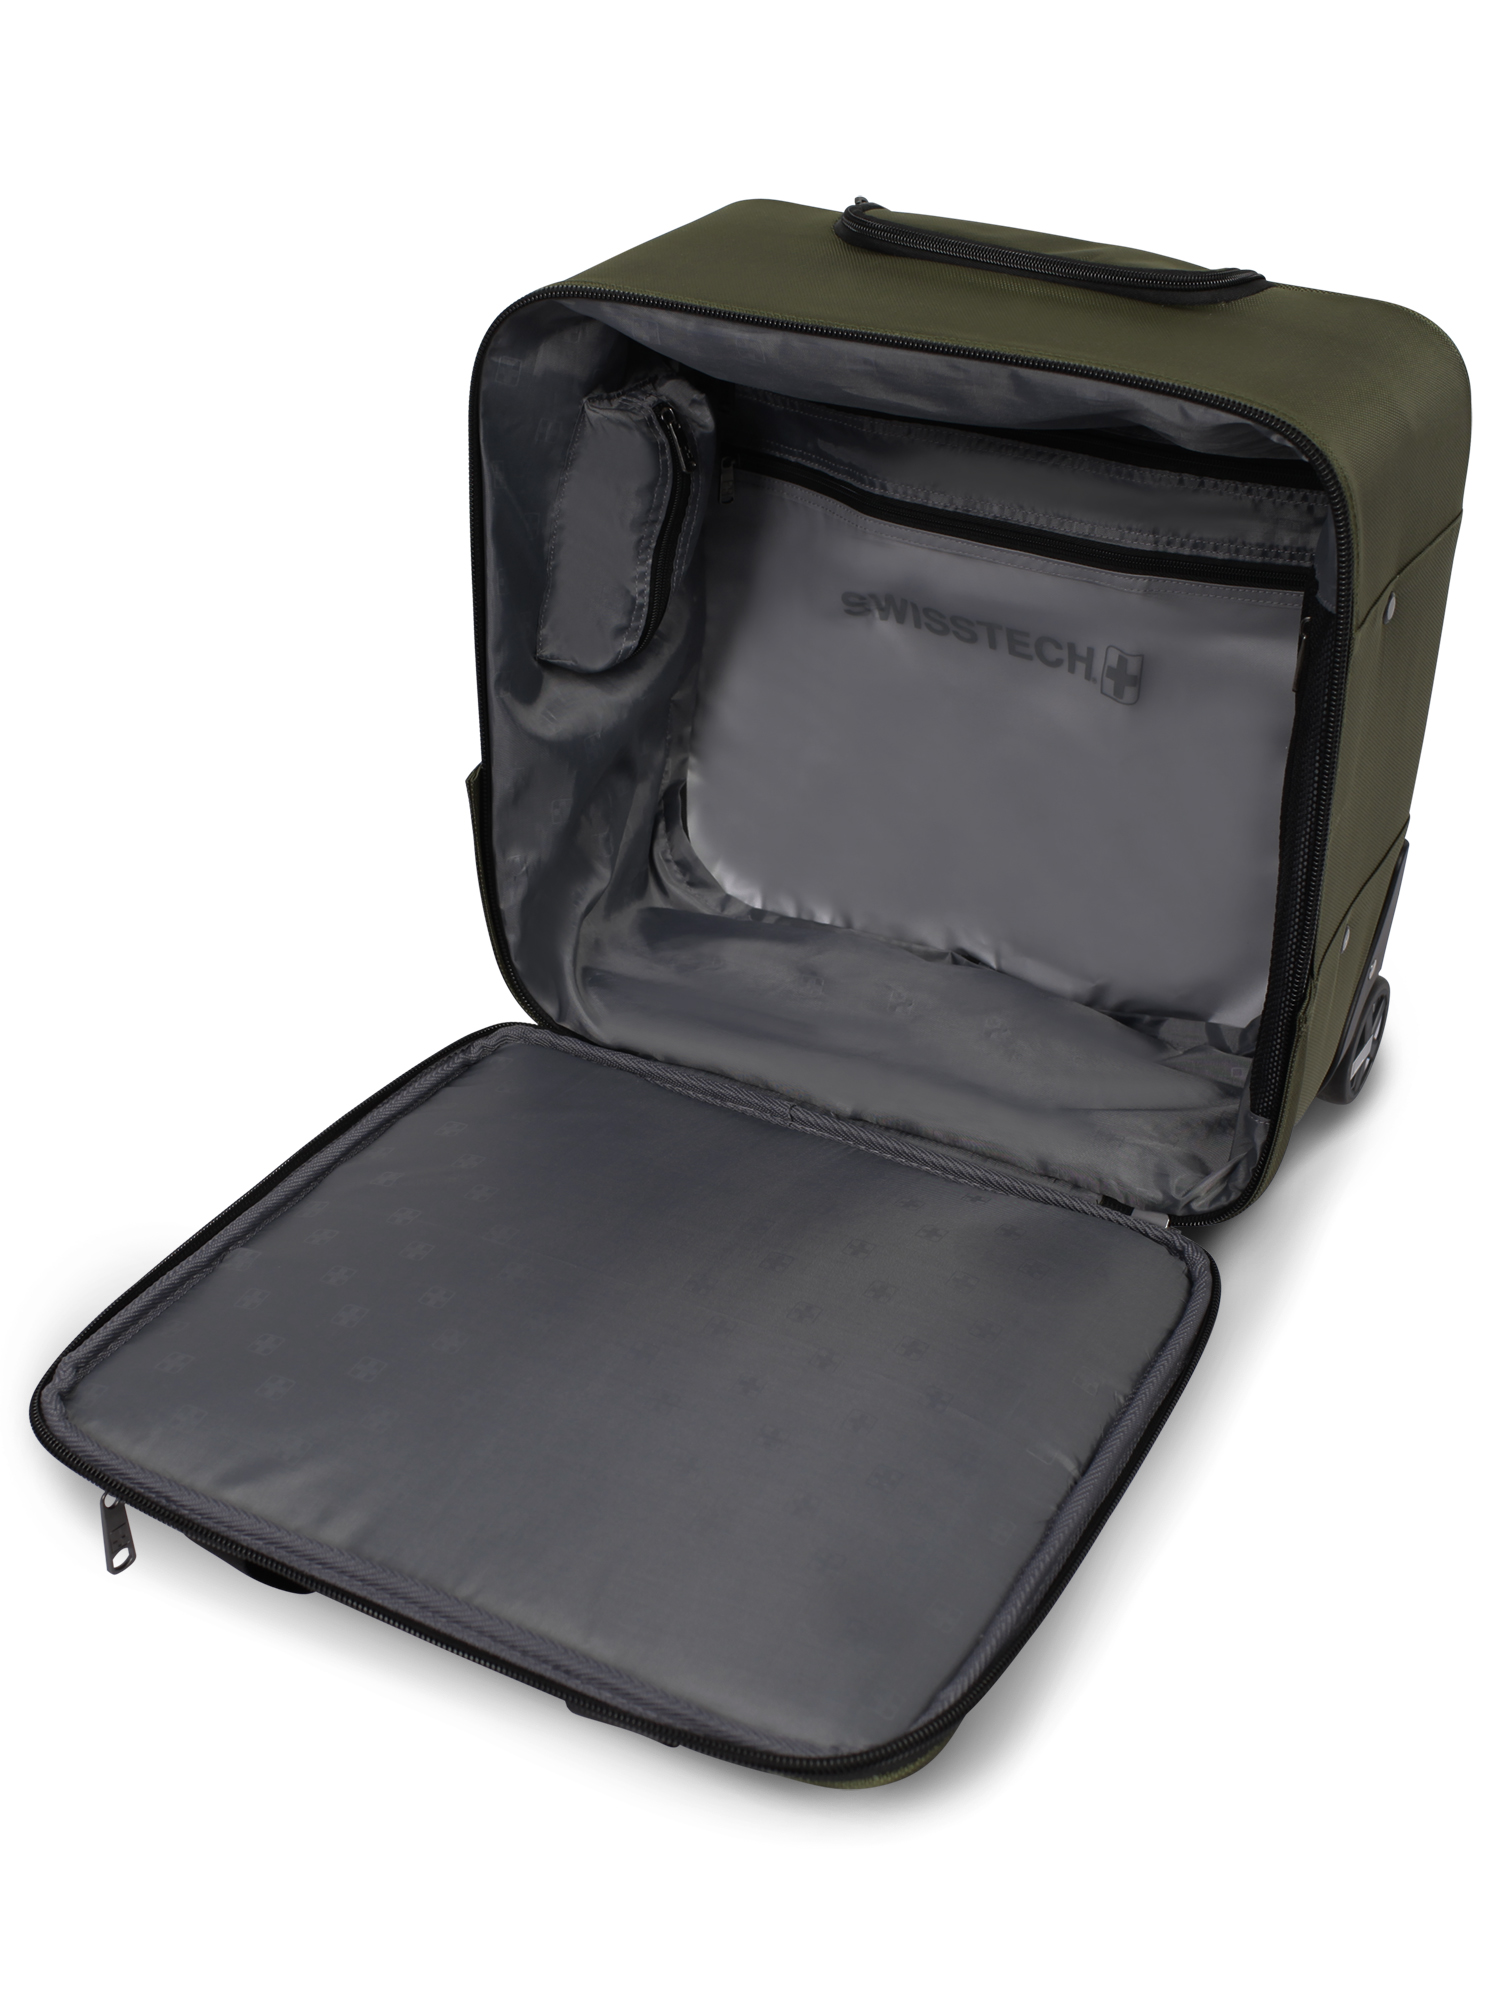 SwissTech Urban Trek 16.5" Under-seater Carry On Luggage, Olive (Walmart Exclusive) - image 4 of 12